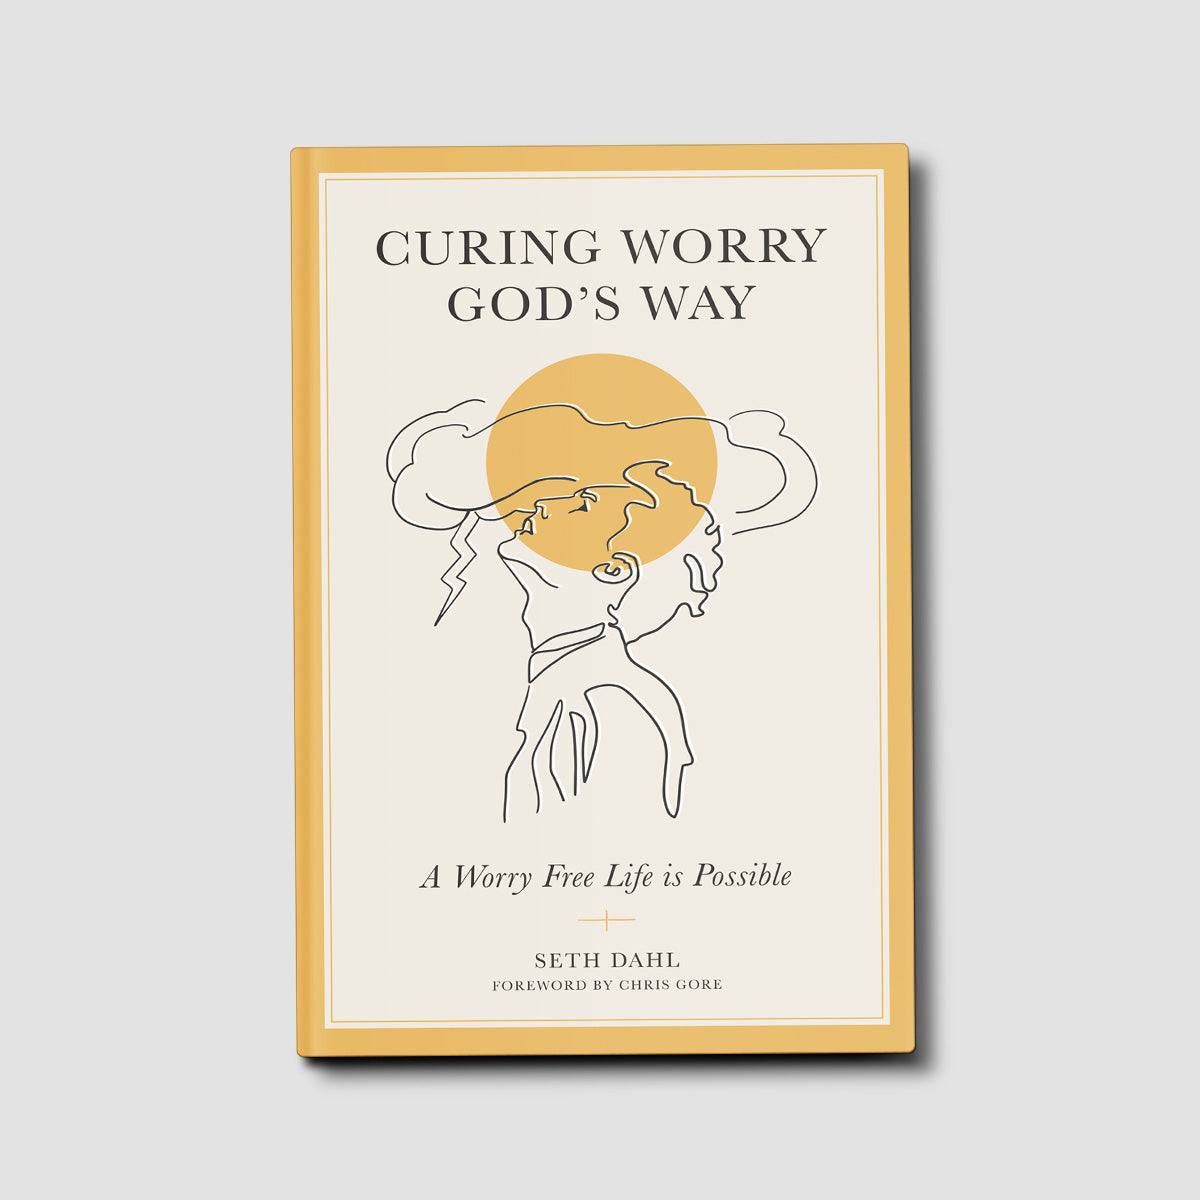 Curing Worry God's Way: A Worry Free Life is Possible